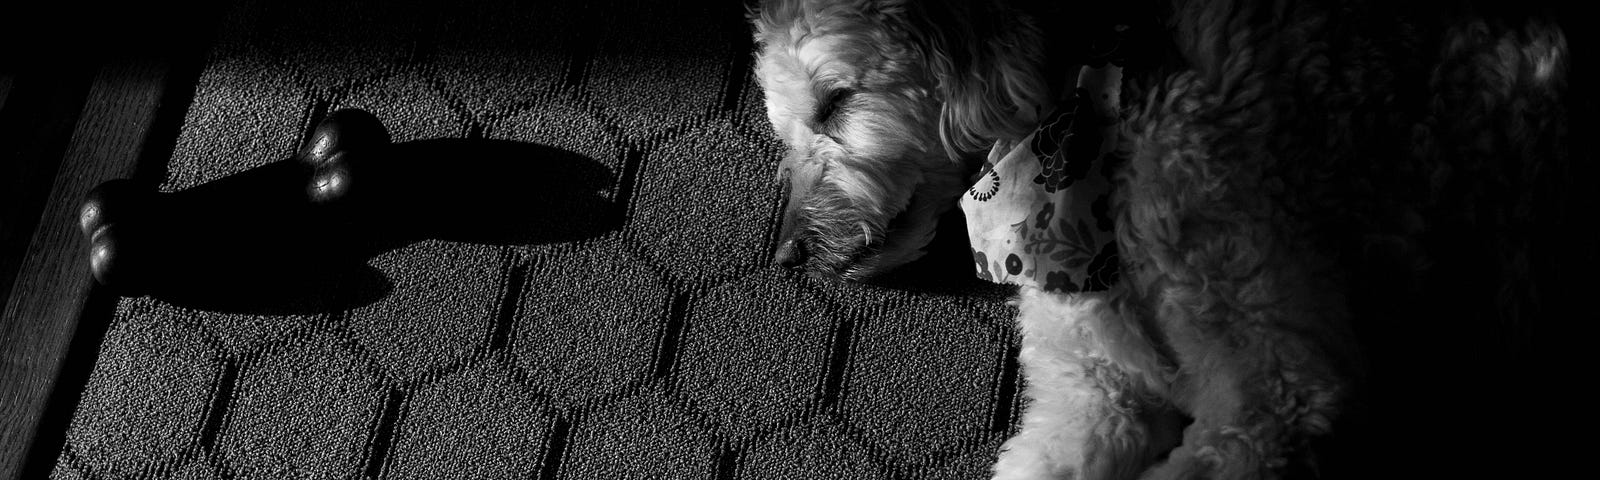 black and white image of a dog laying on a carpet next to a bone